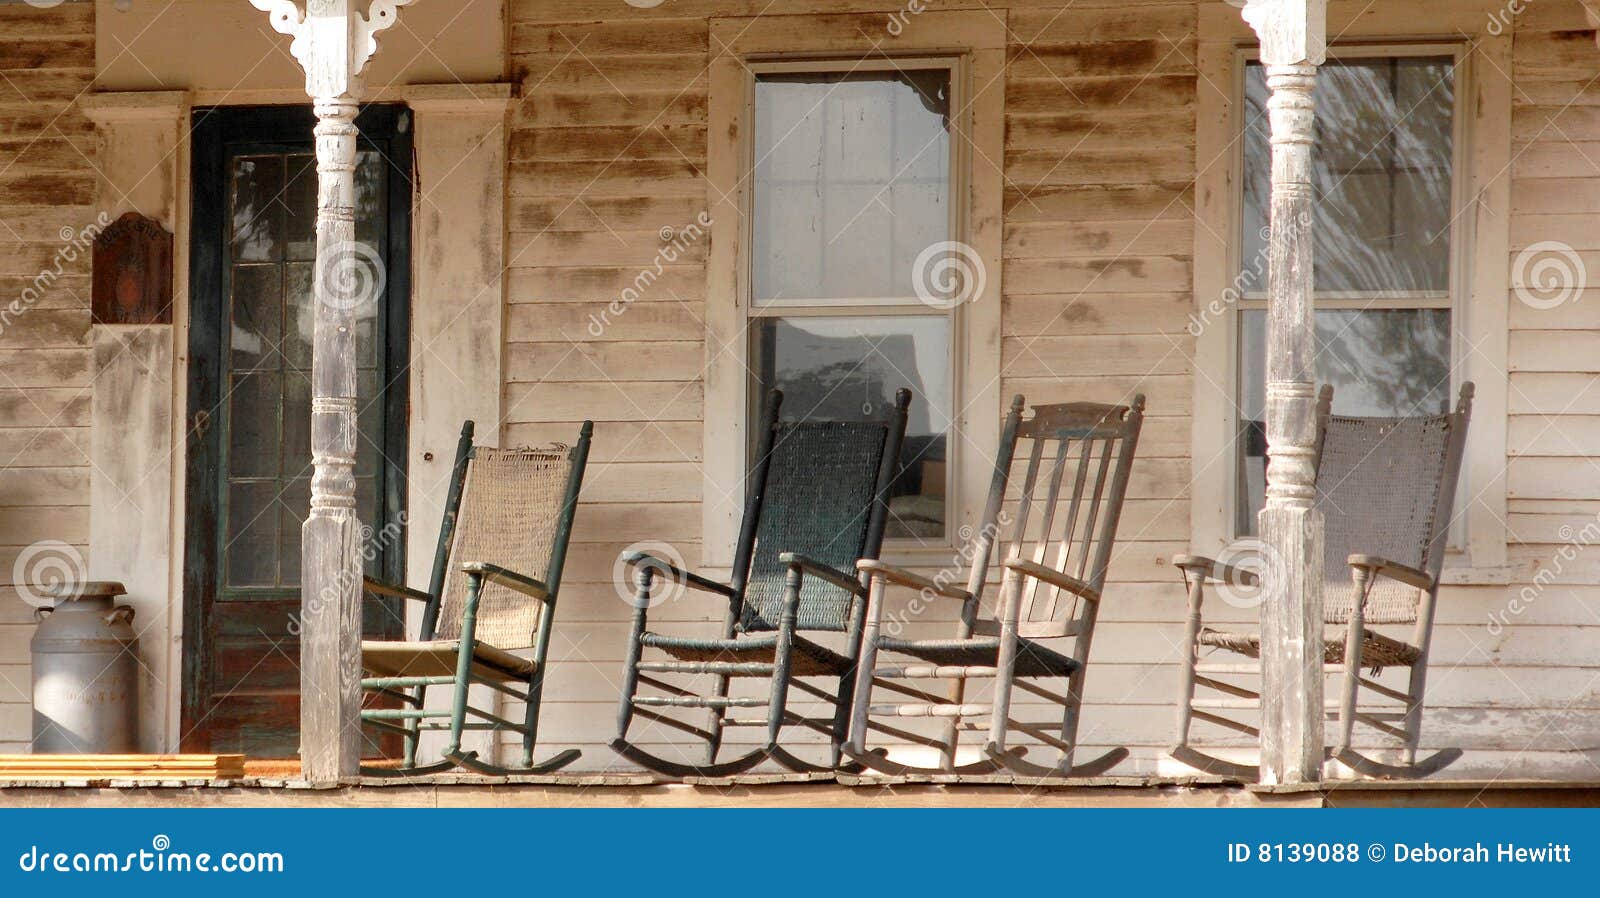 antique rocking chairs in rural connecticut